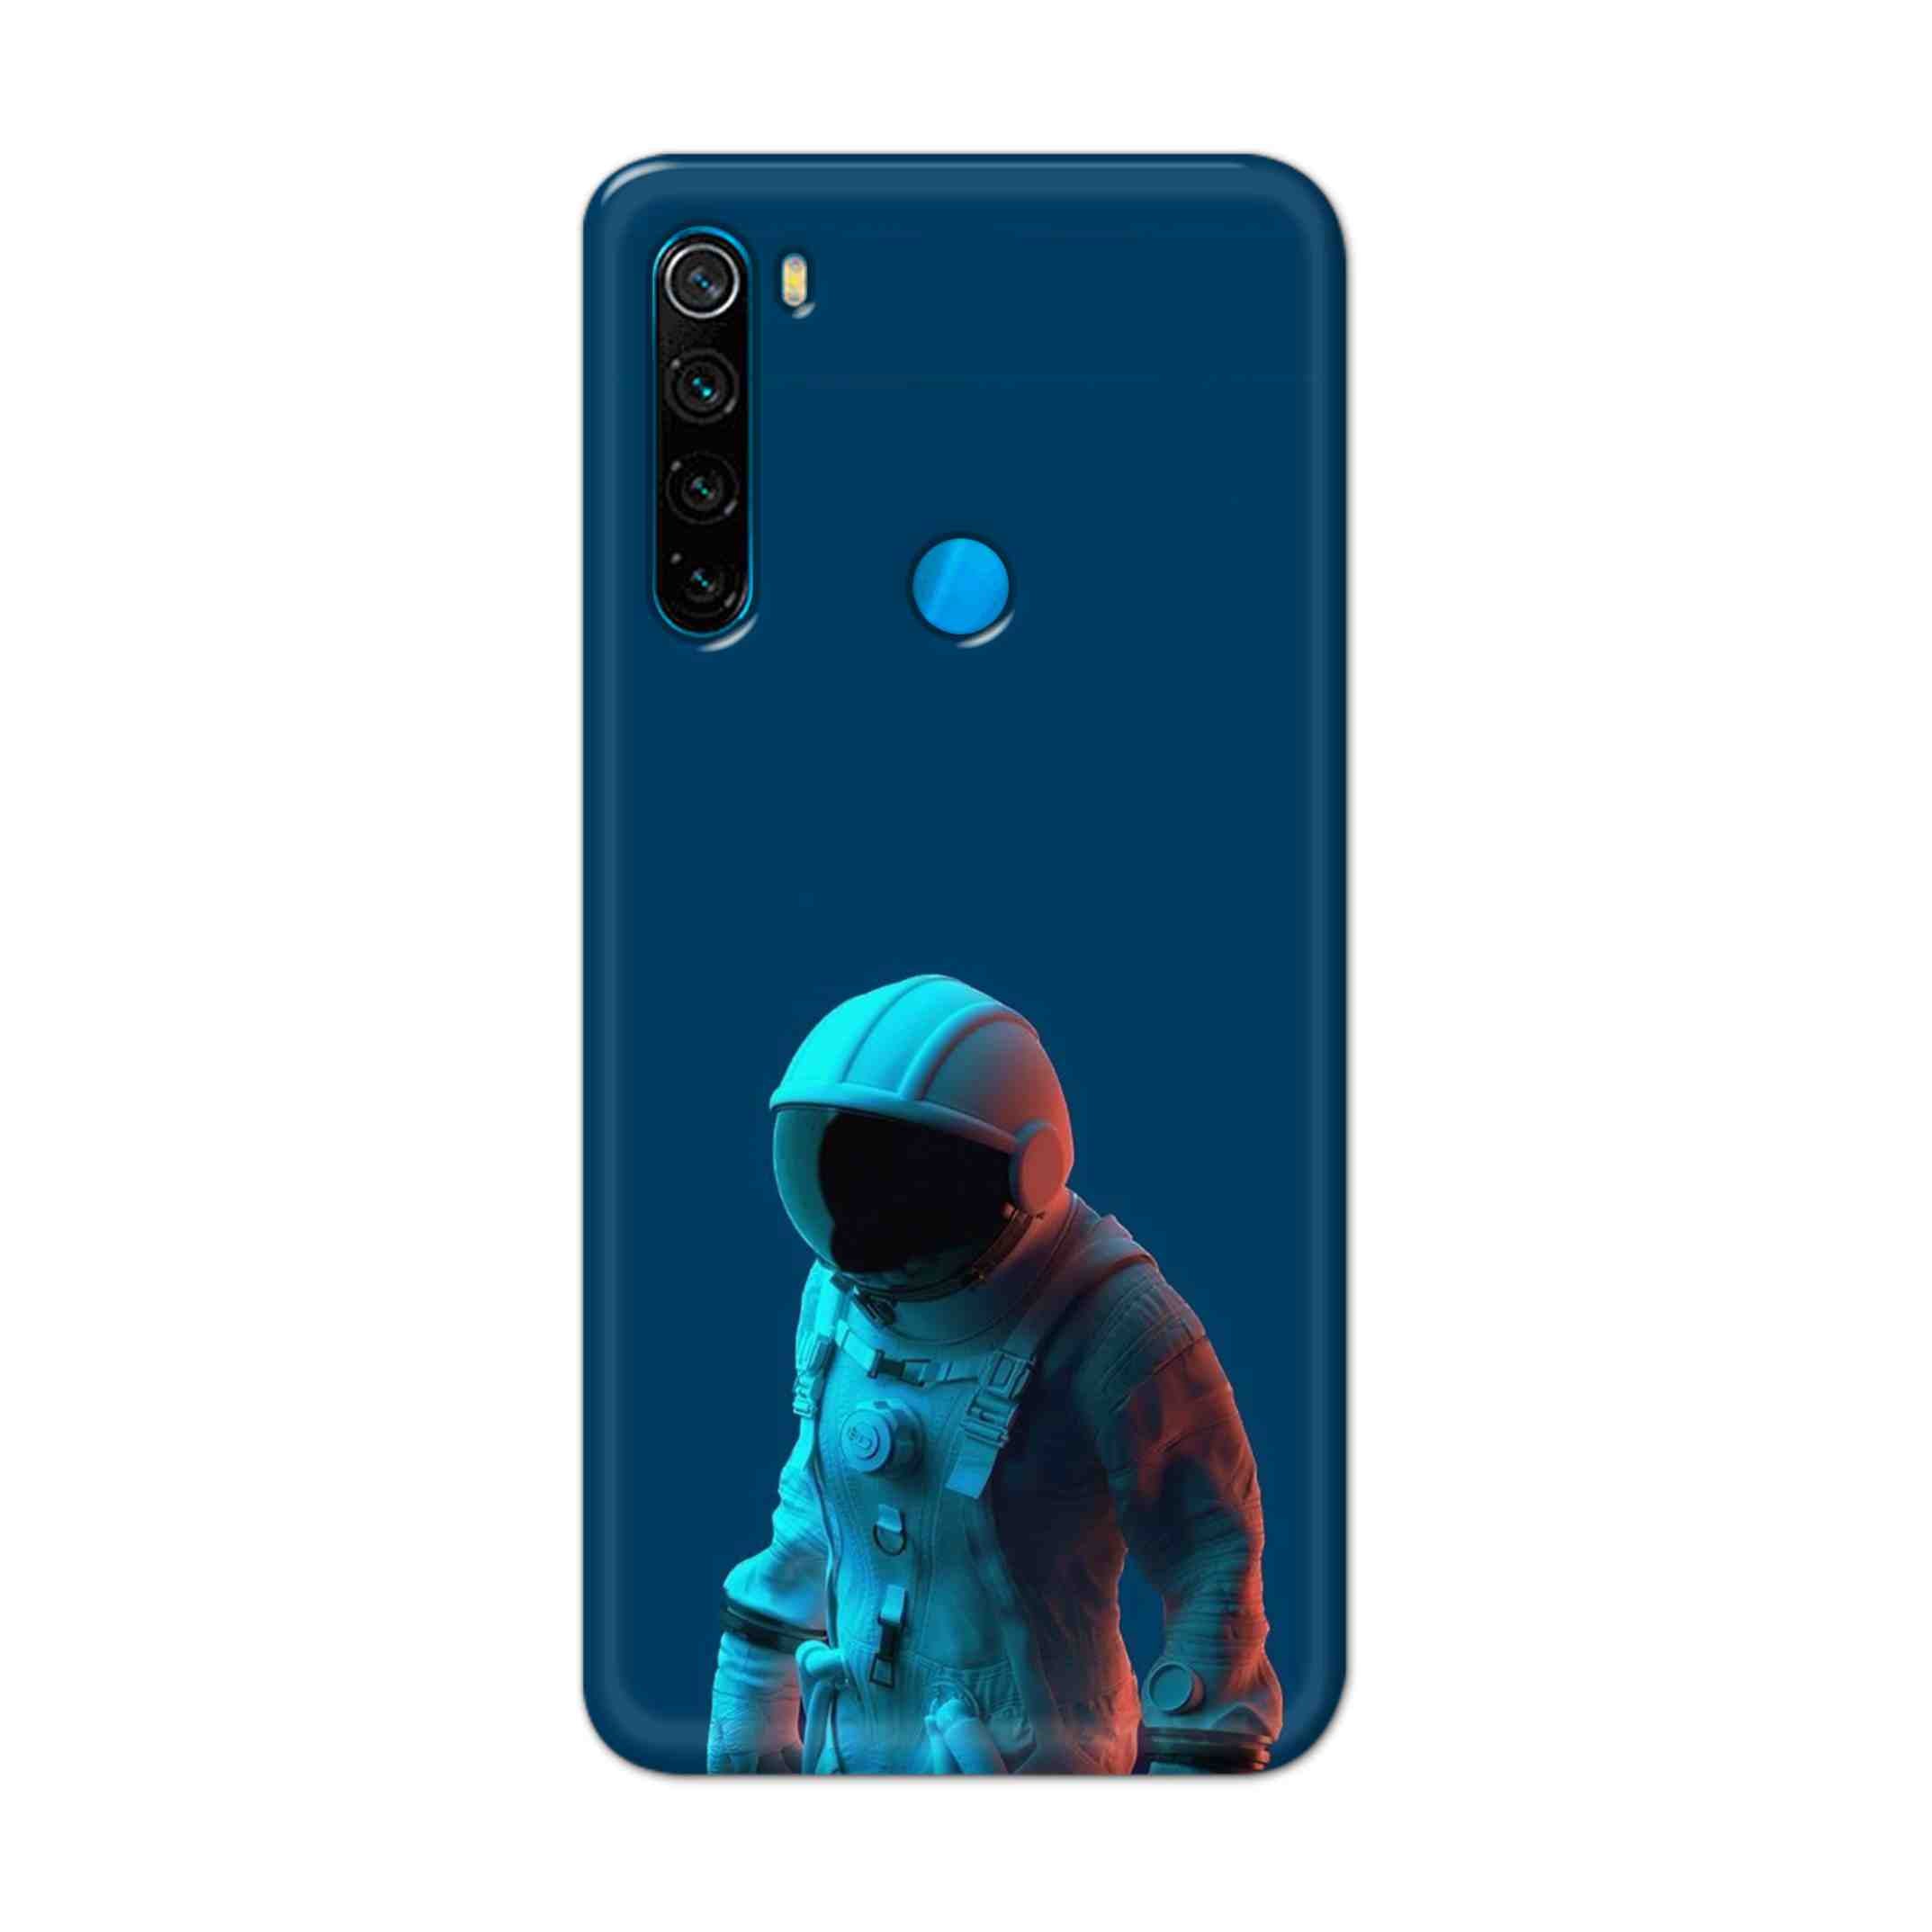 Buy Blue Astronaut Hard Back Mobile Phone Case Cover For Xiaomi Redmi Note 8 Online